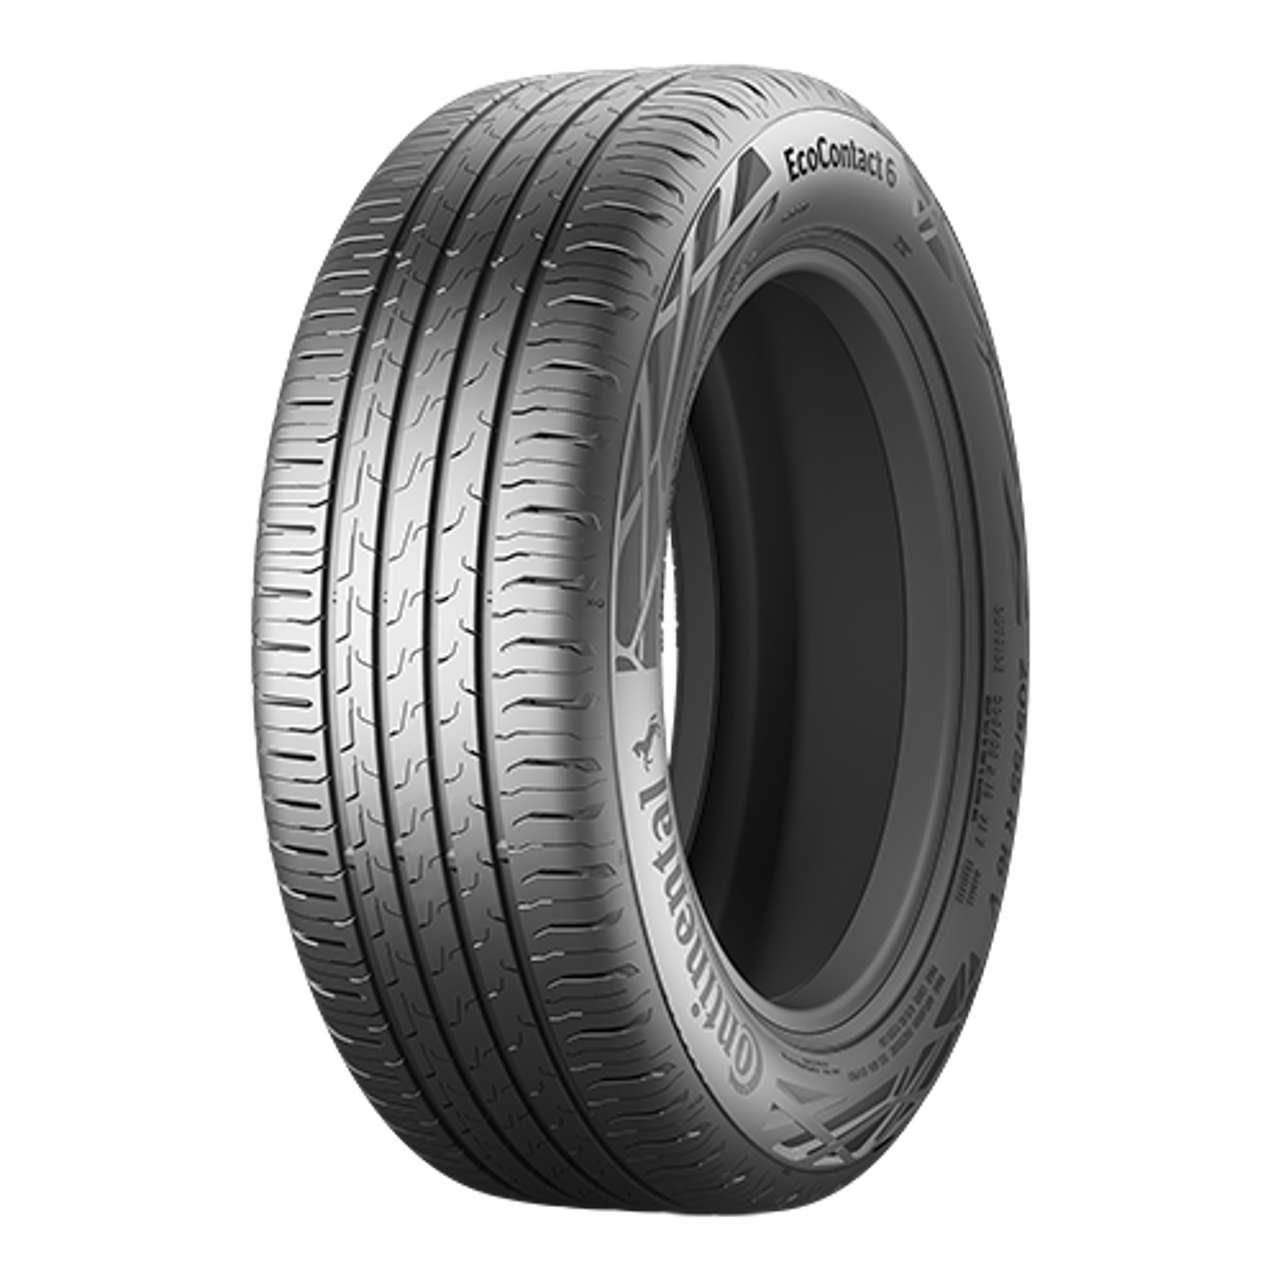 CONTINENTAL ECOCONTACT 6 (EVc) 155/80R13 79T